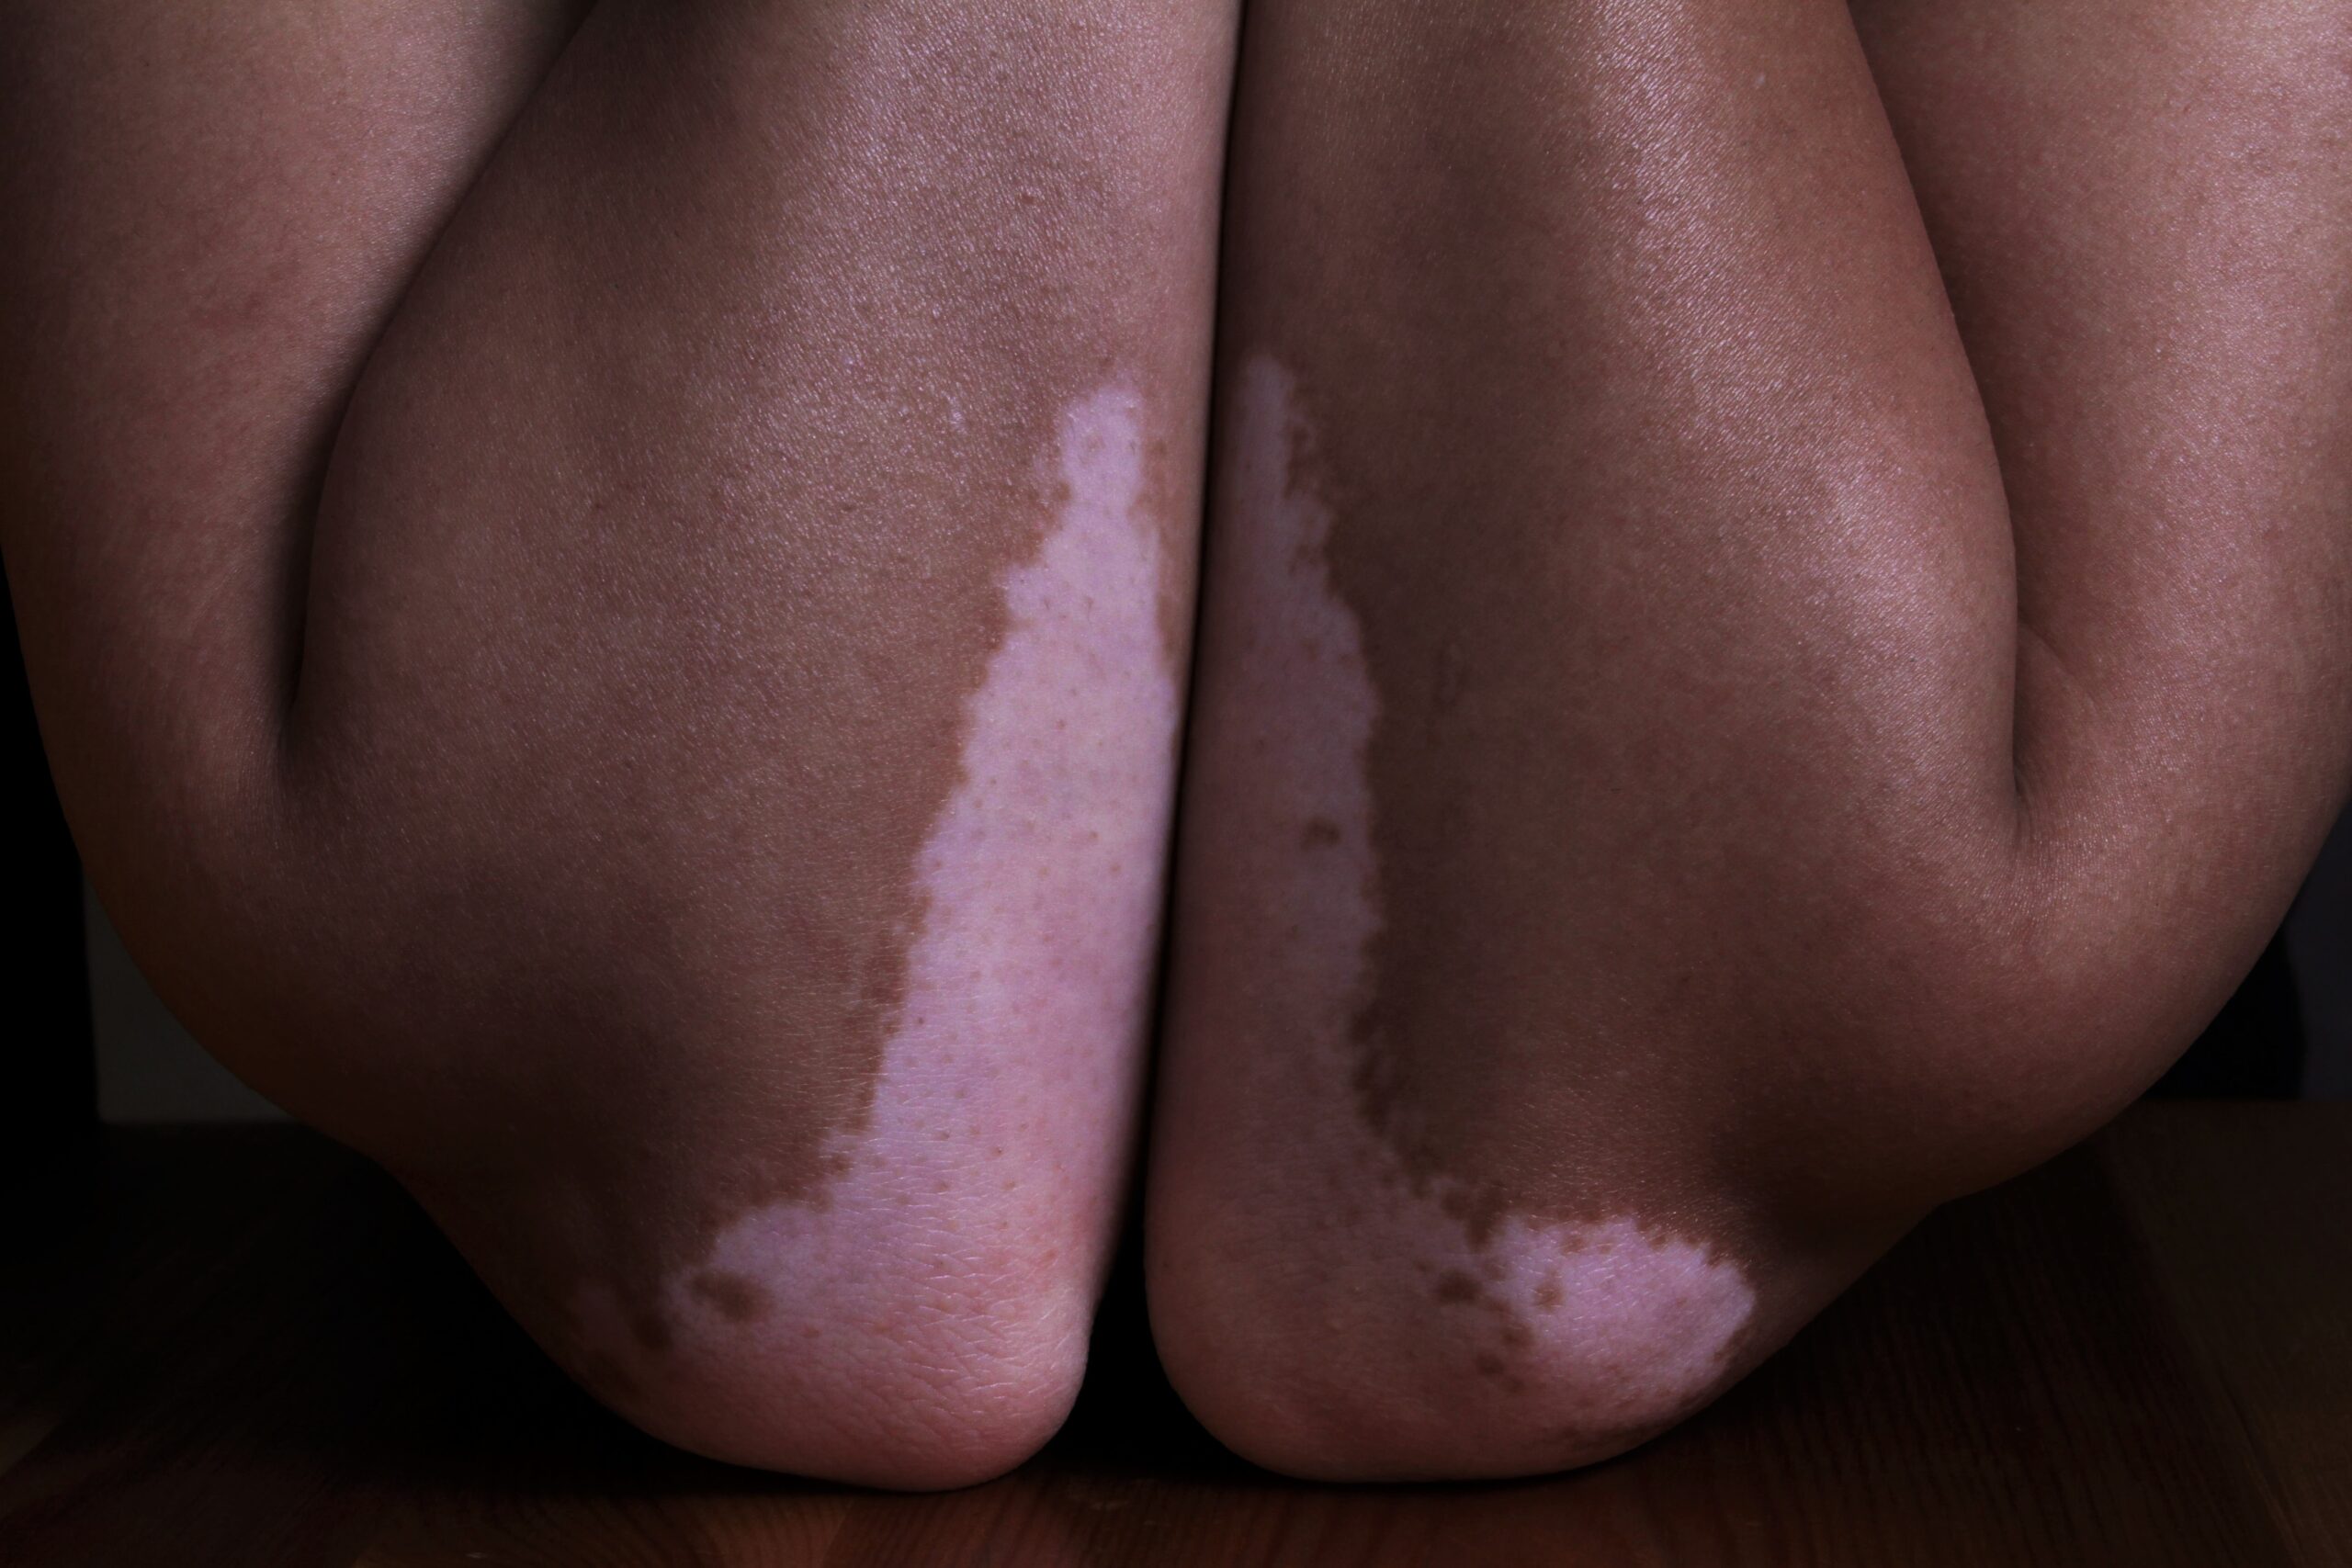 How To Detect Vitiligo? Signs People Should Look Out For & Types, Treatment And Prevention